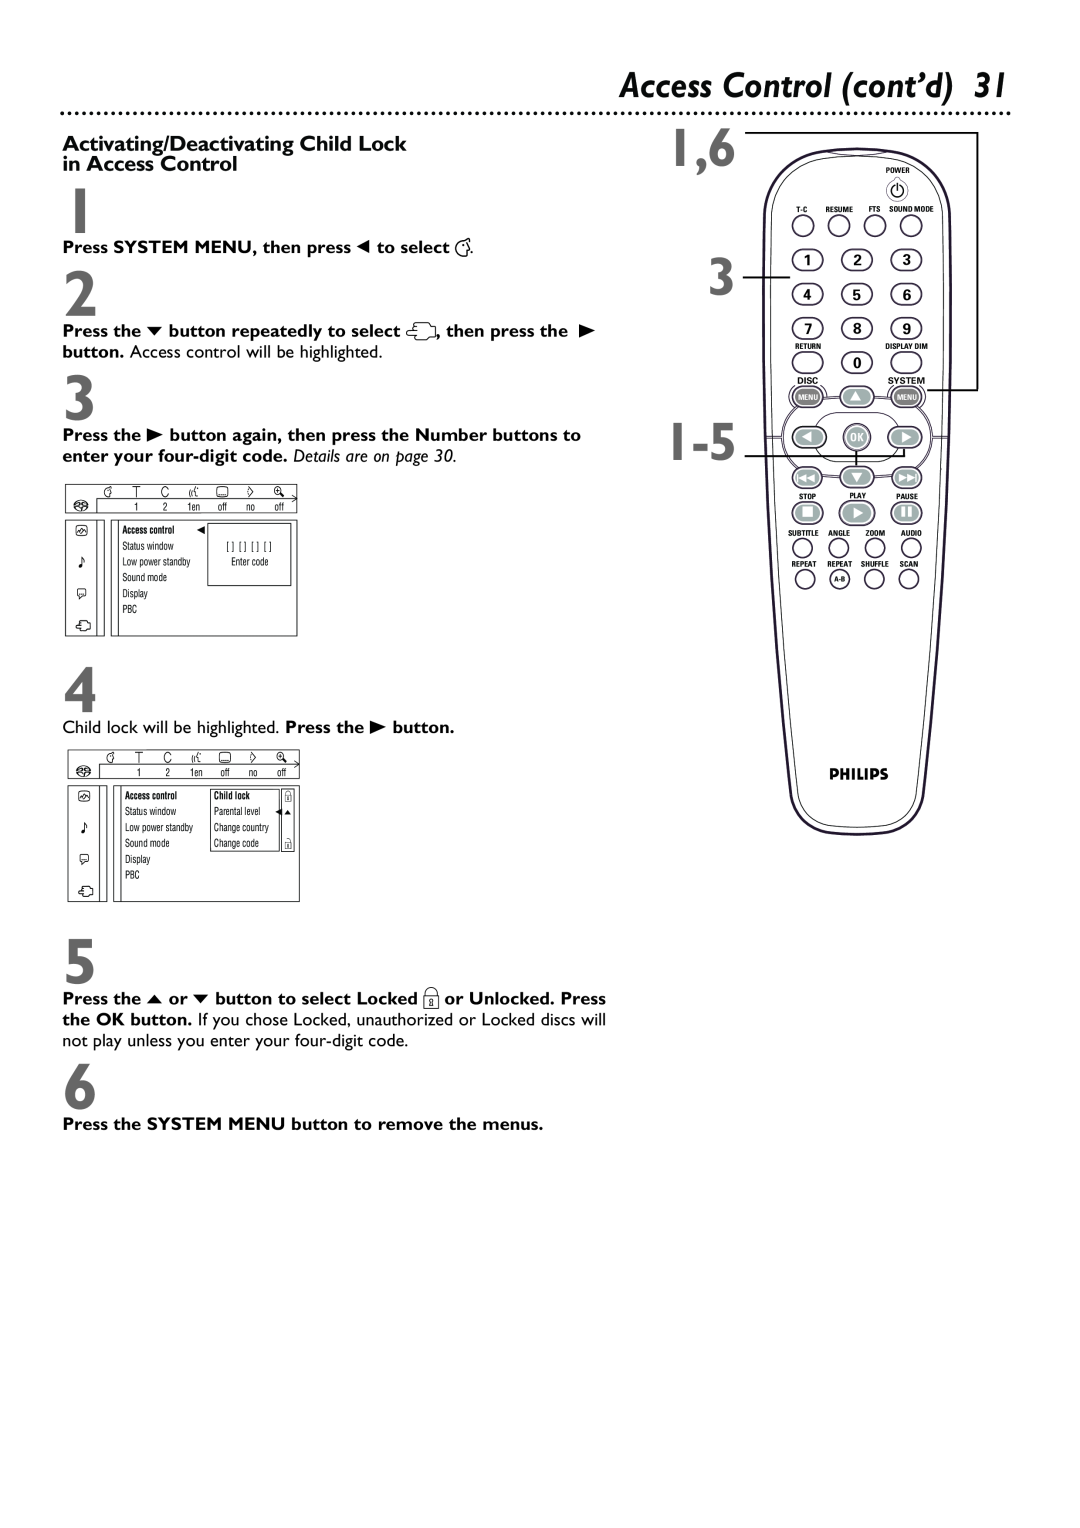 Philips DVD962SA owner manual Access Control cont’d, Activating/Deactivating Child Lock in Access Control 